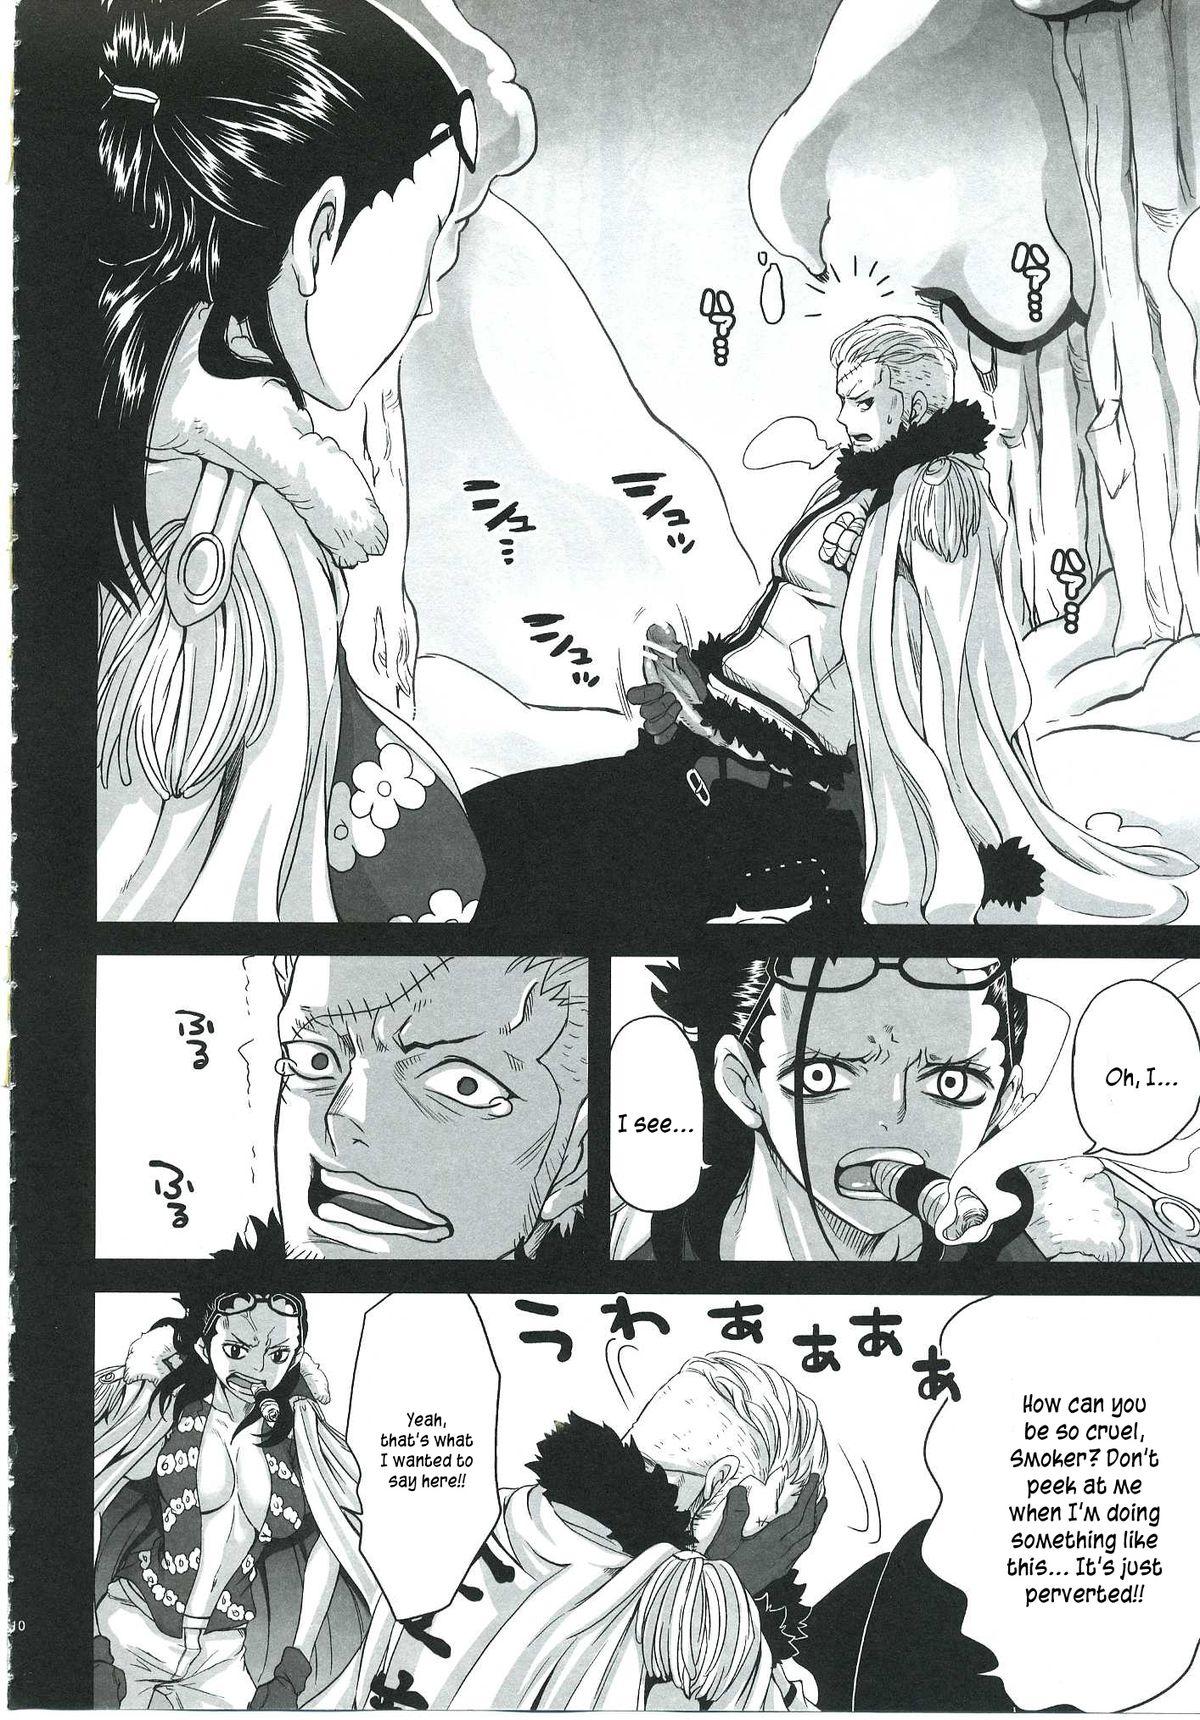 Fun Exchange - One piece Boy Girl - Page 7